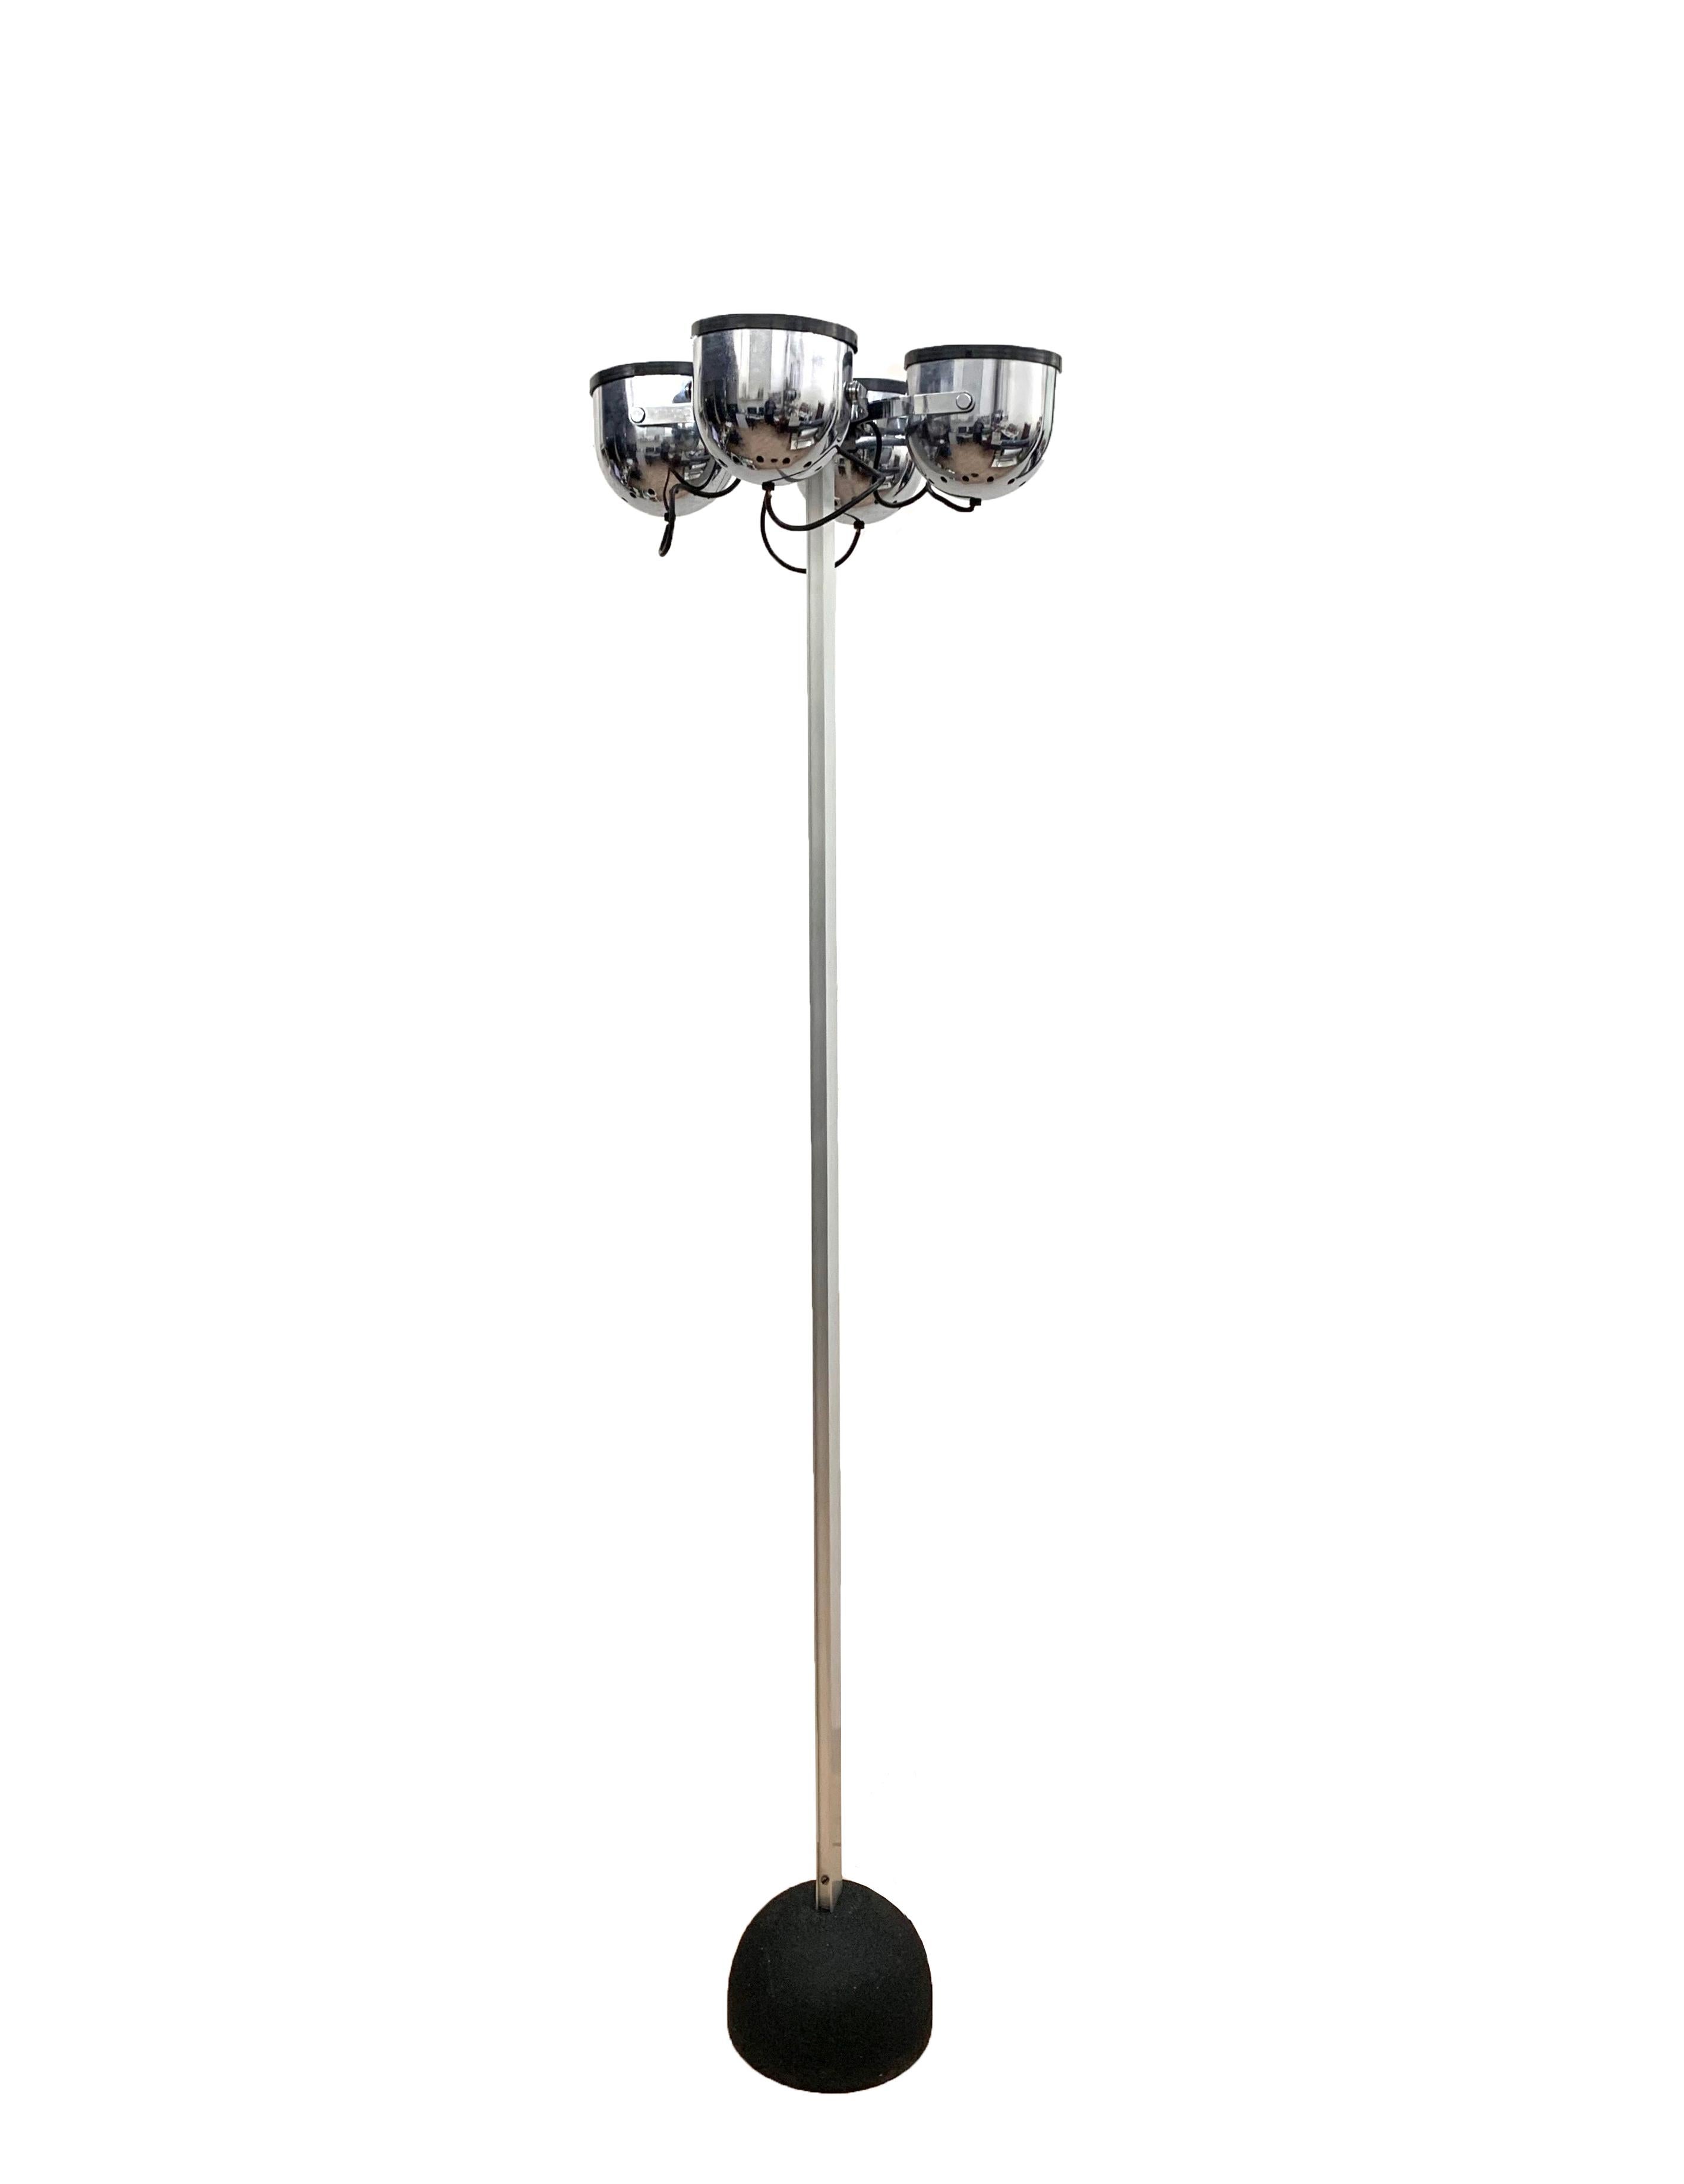 Sistema Trepiù floor lamp by Gae Aulenti and Livio Castiglioni for Stilnovo (4 incised signature), Italy 1972.
Impressive floor lamp with four round lights that can be rotated in all directions.
Made of chromed metal and aluminum with cast iron